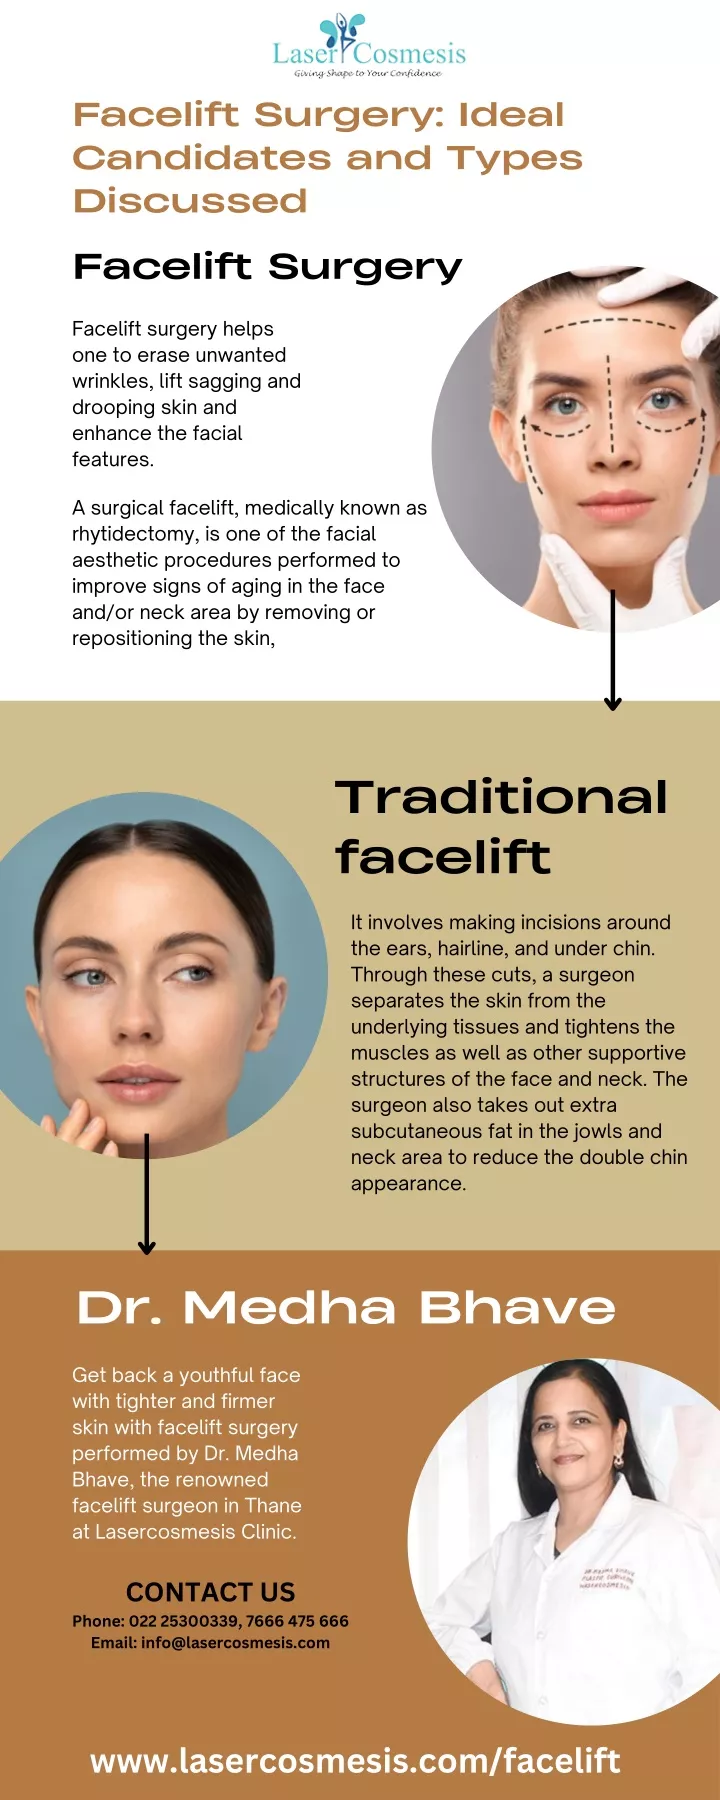 facelift surgery ideal candidates and types